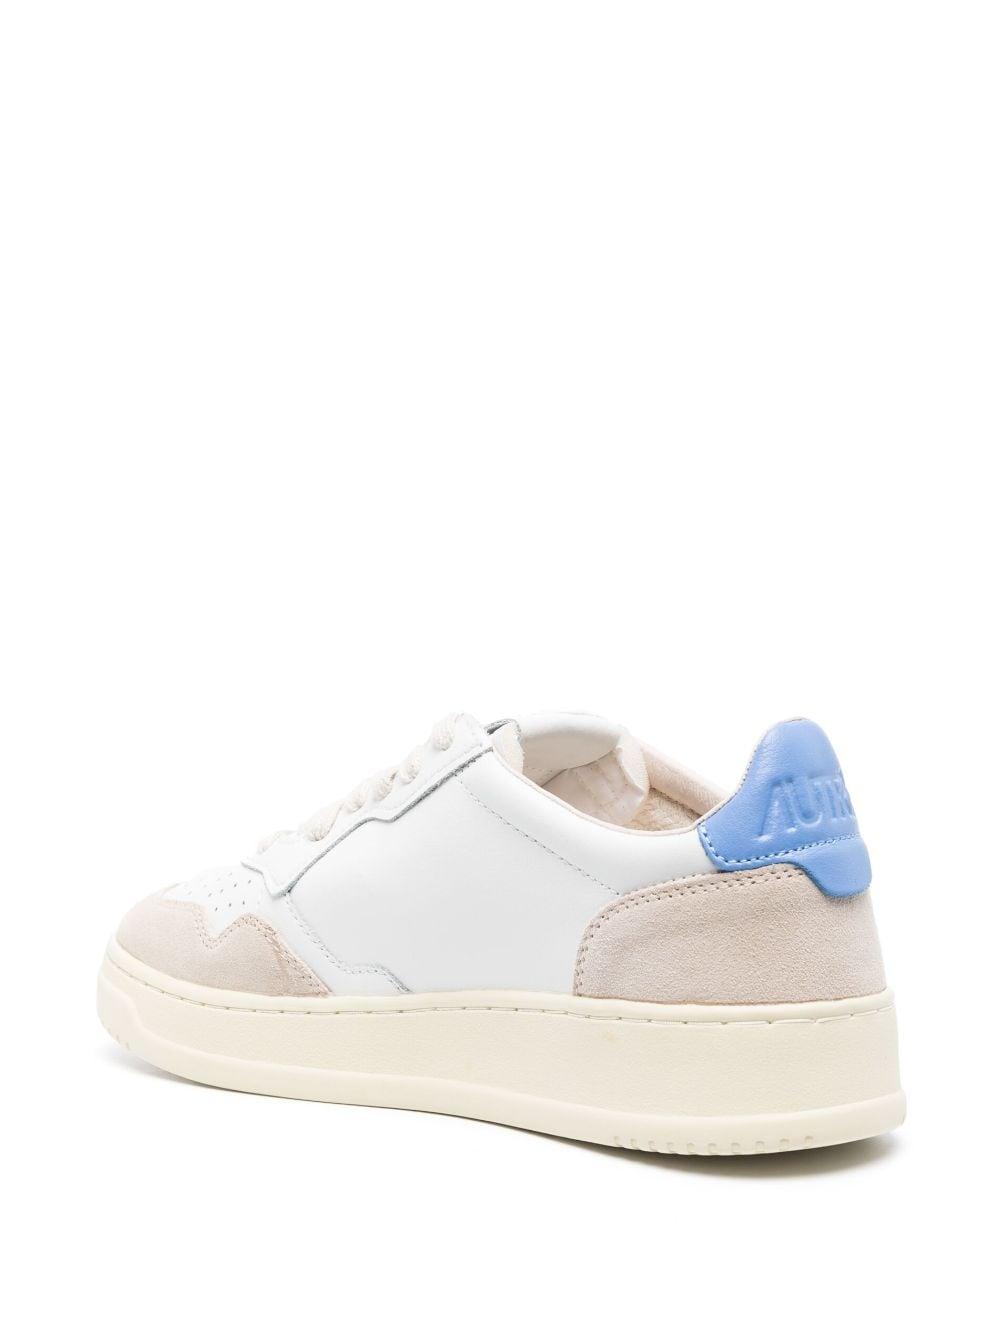 Autry Medalist Sneakers in White | Lyst